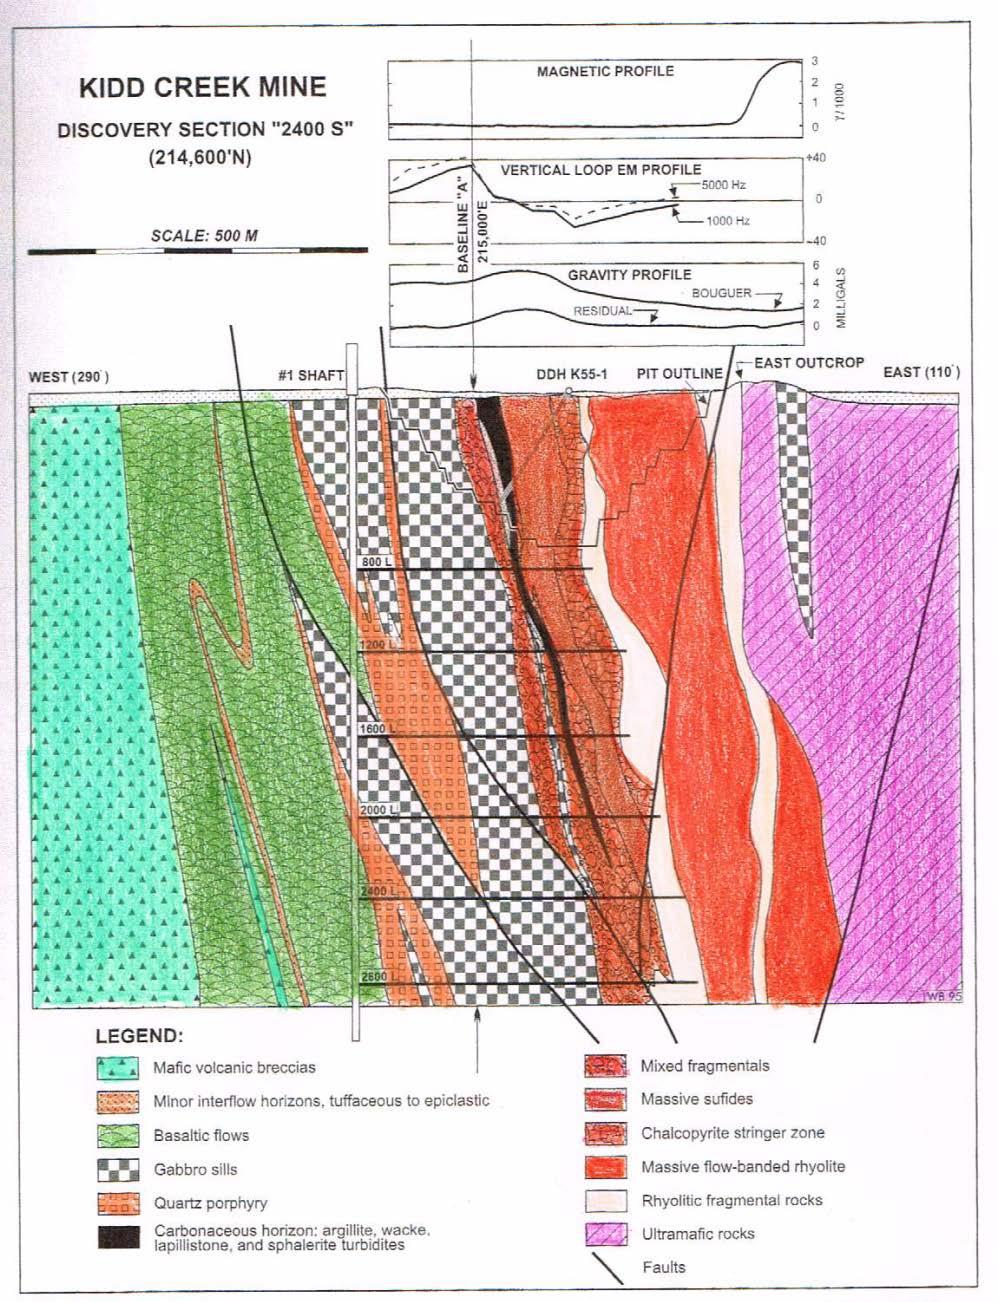 KIDD CREEK MINE DISCOVERY CROSS SECTION (Showing Mag,